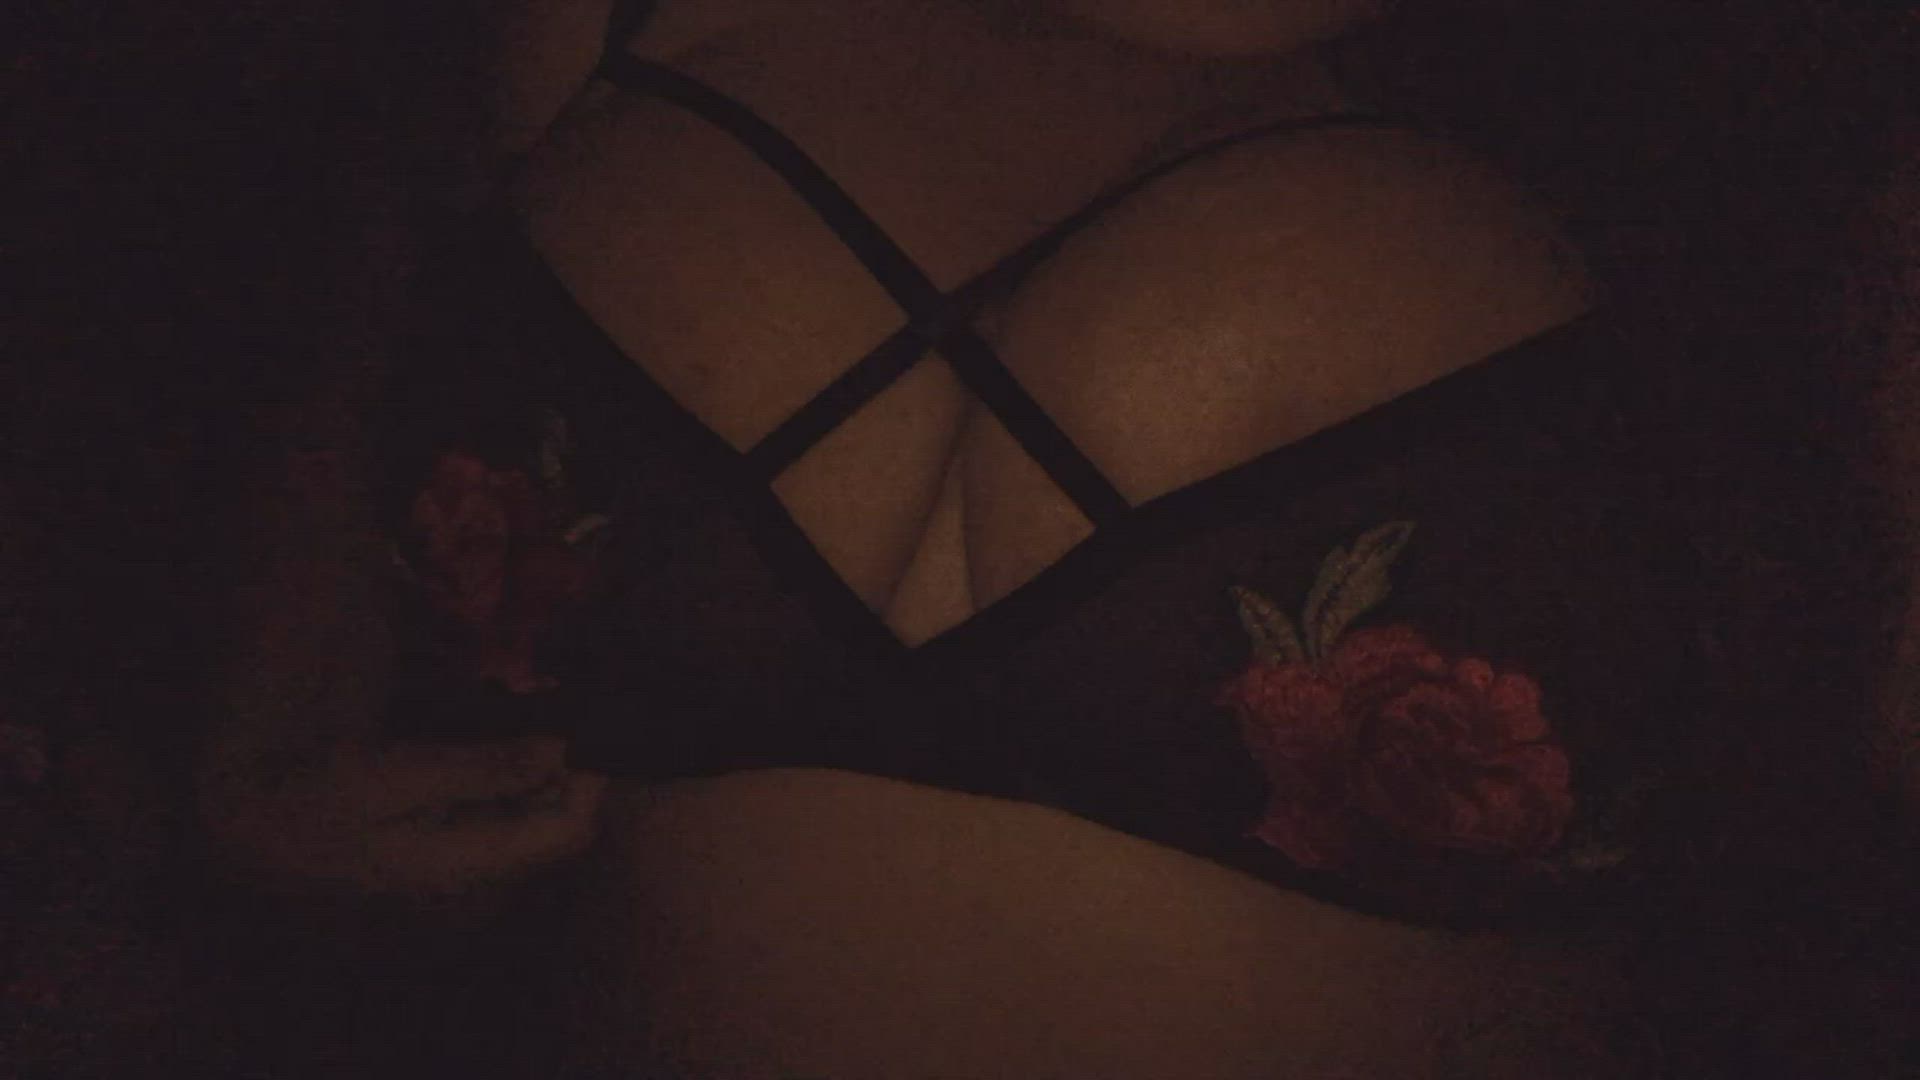 Big Tits porn video with onlyfans model btbvxo <strong>@btbxo</strong>